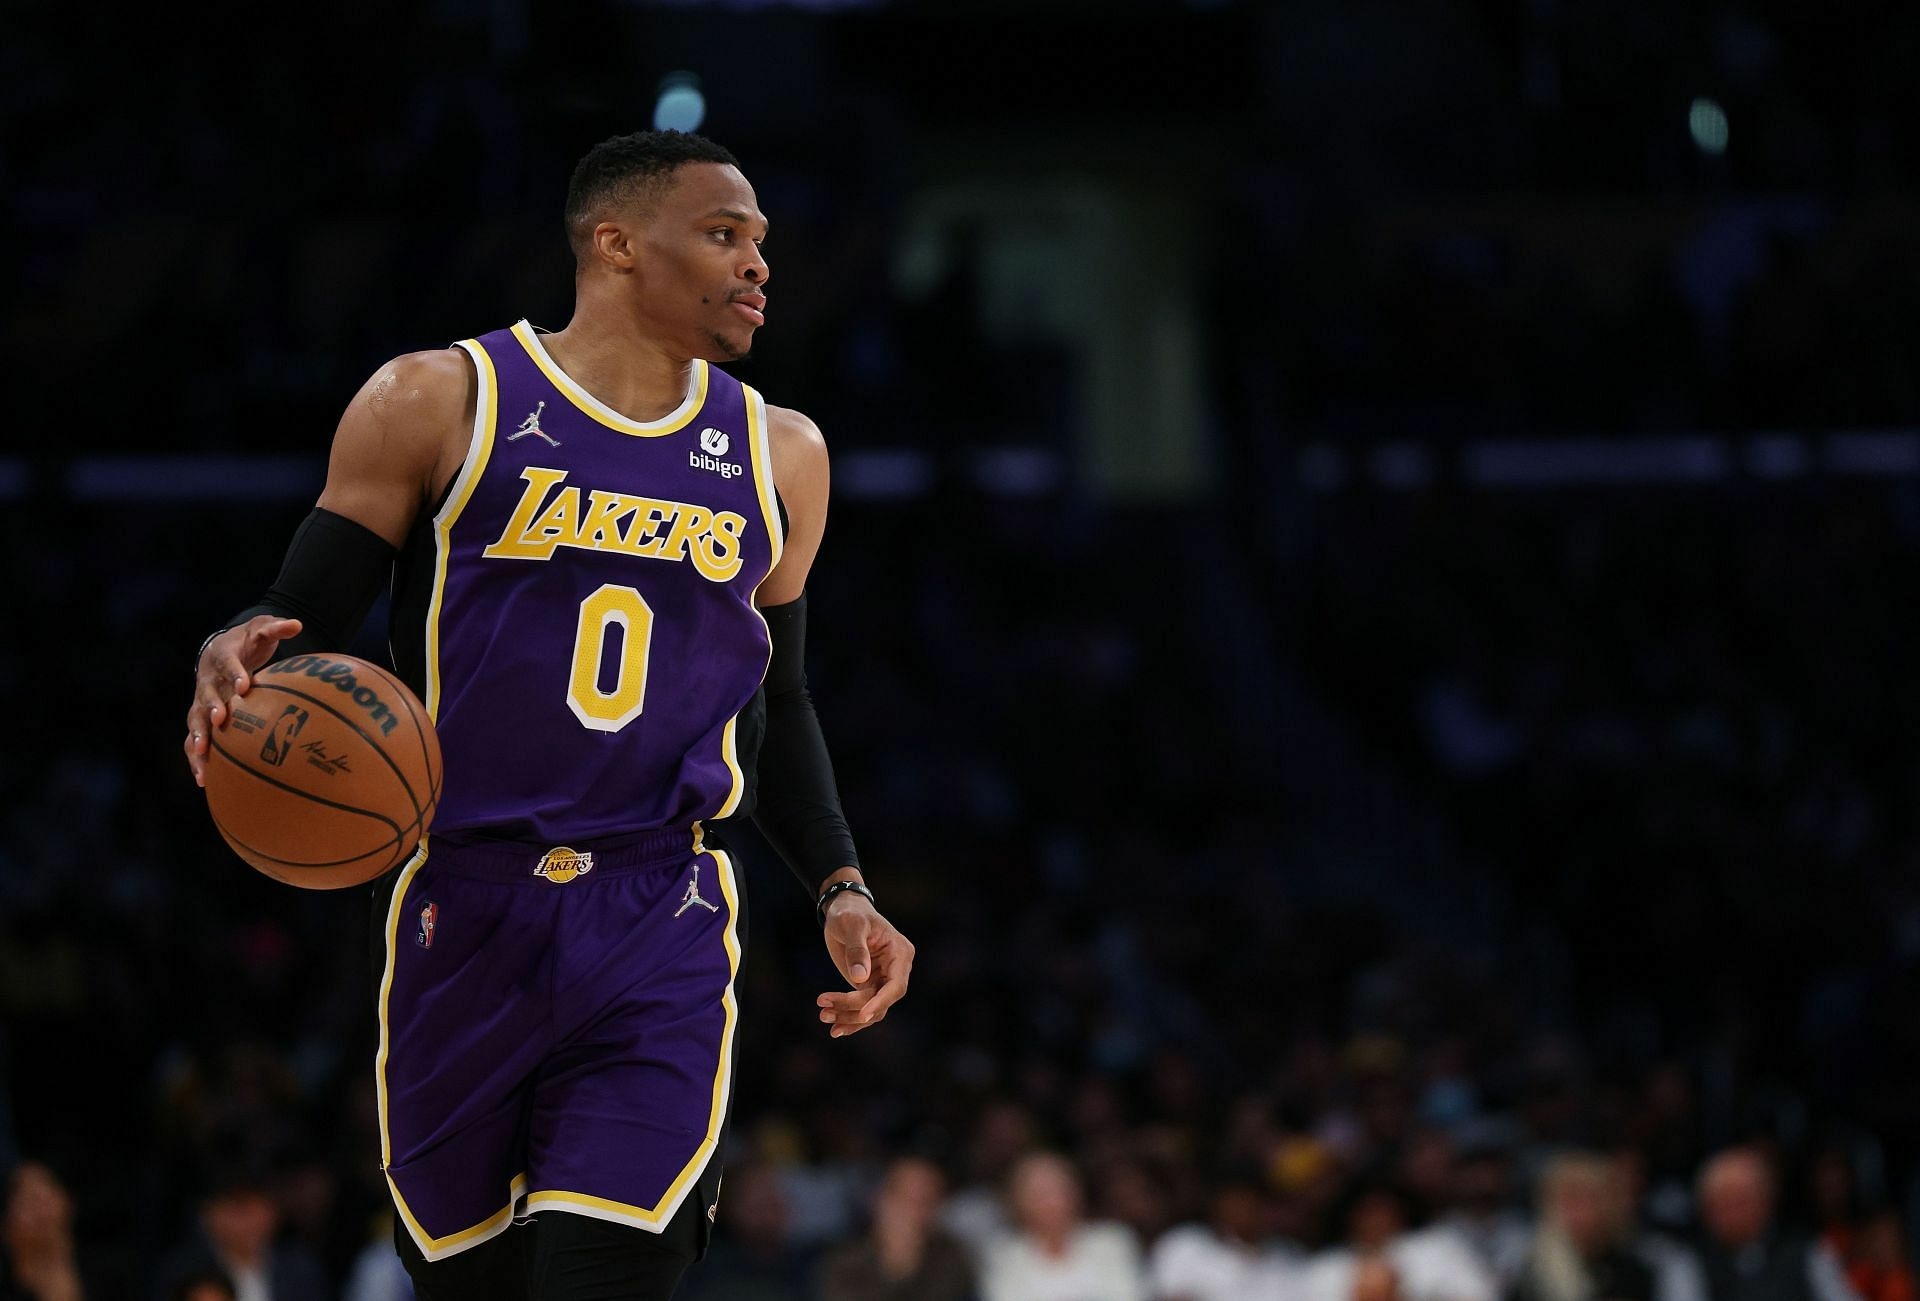 Lakers' Russell Westbrook splits with longtime agent Thad Foucher over 'irreconcilable differences'